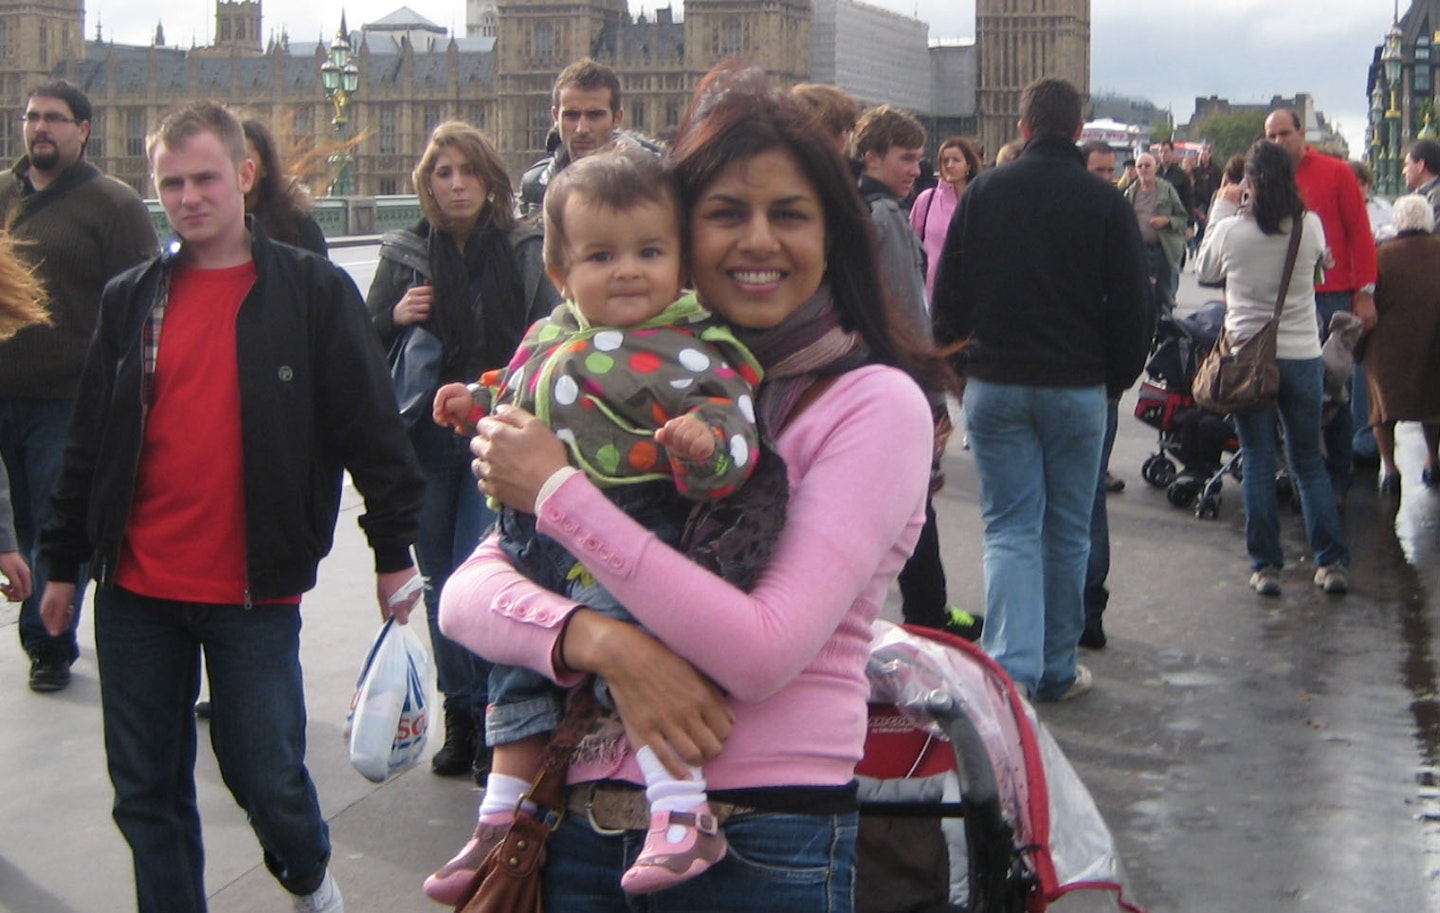 Joy Persaud, mother, daughter Lilly